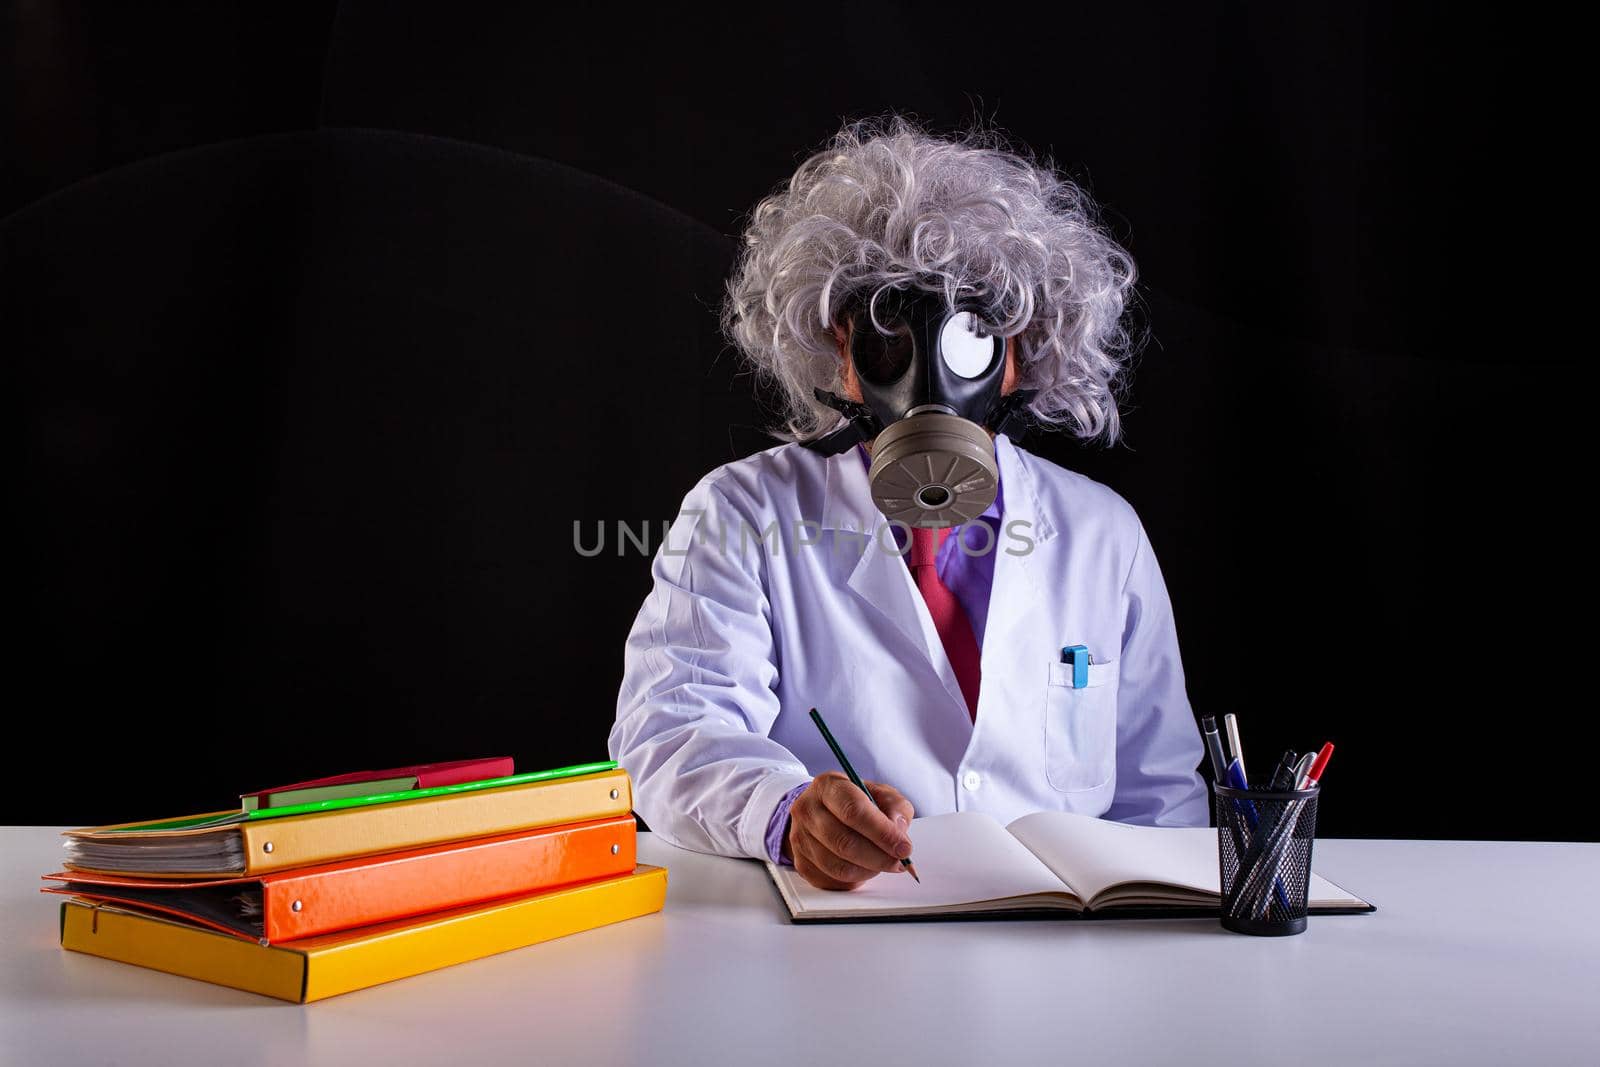 Crazy science teacher in white coat with unkempt hair sitting at the desk wears a gas mask